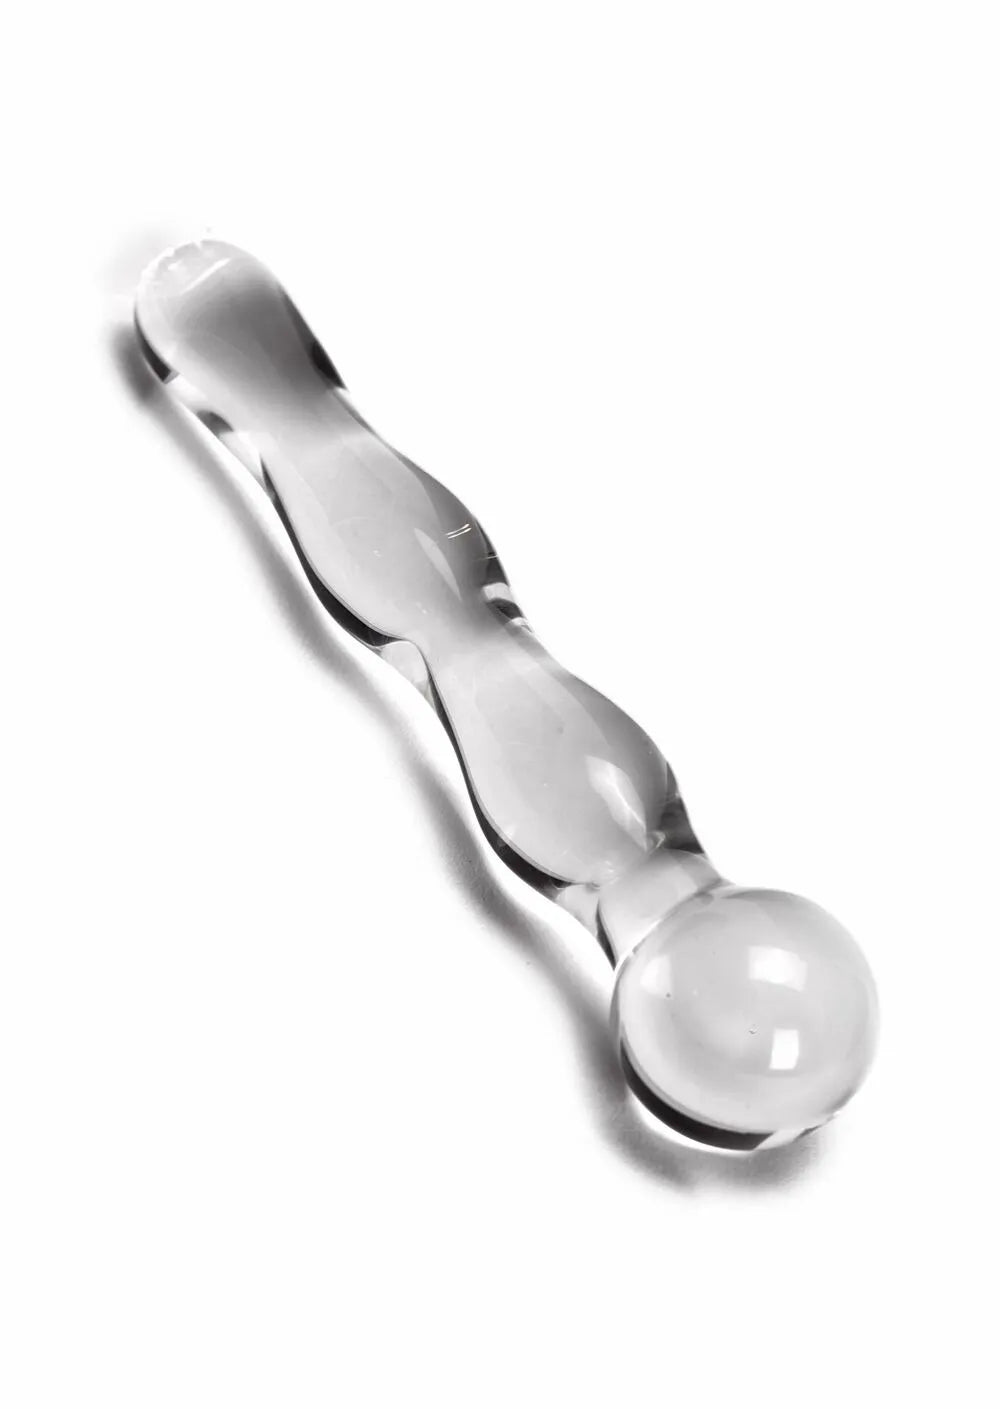 5 Inch Glass Rippled Dildo From Ann Summers, Image 3